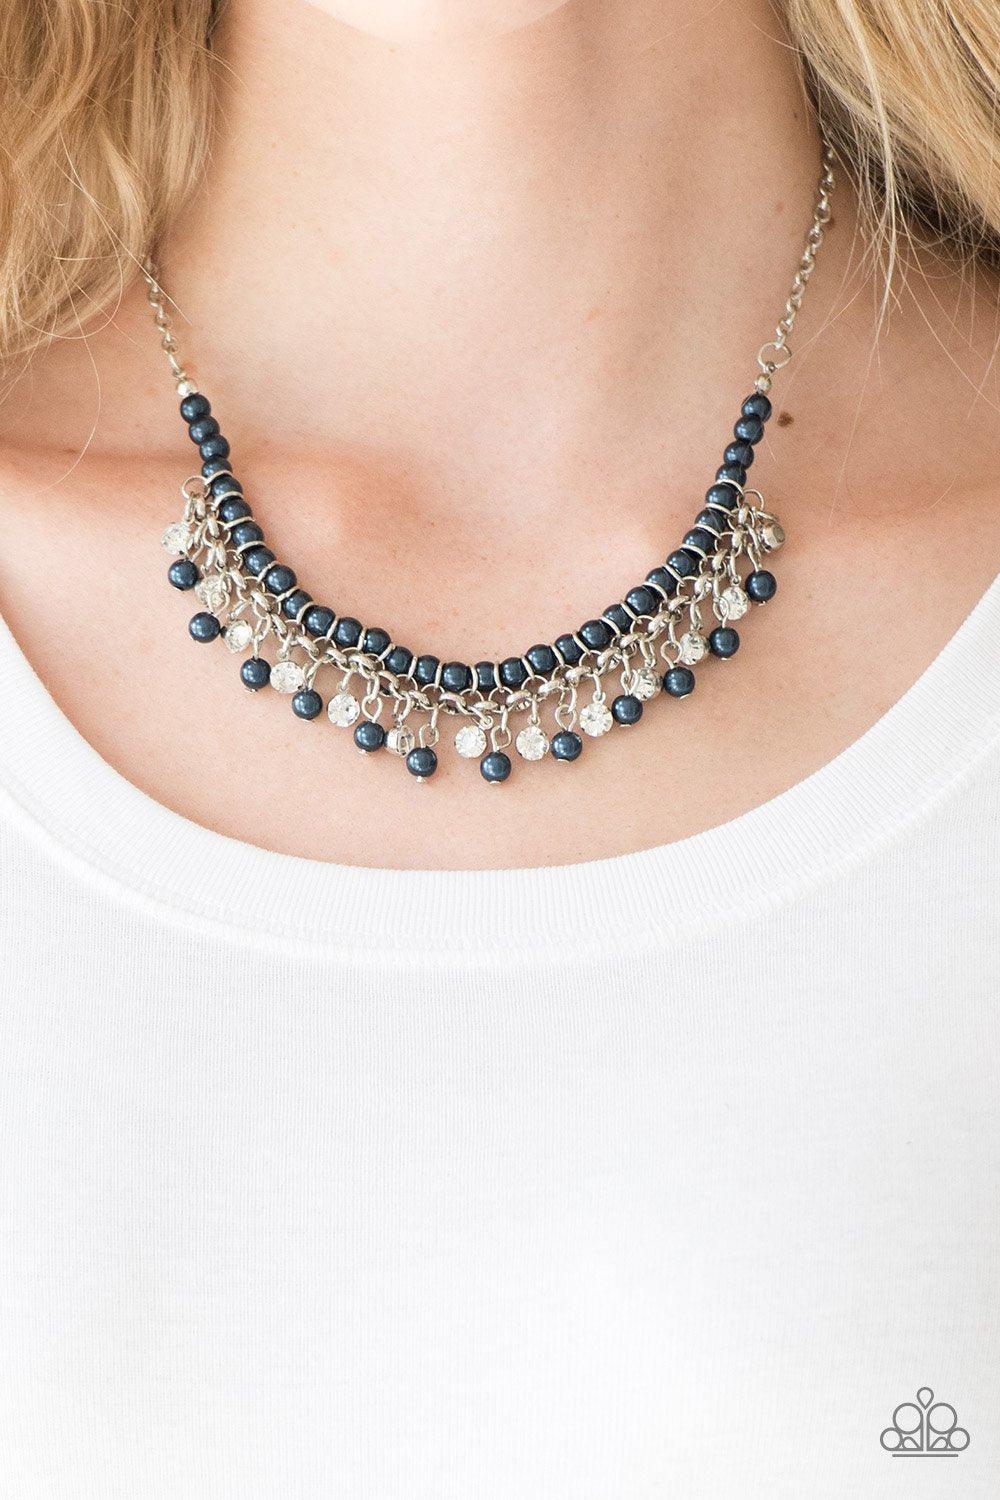 A Touch of CLASSY Blue Pearl and White Rhinestone Necklace - Paparazzi Accessories - lightbox -CarasShop.com - $5 Jewelry by Cara Jewels